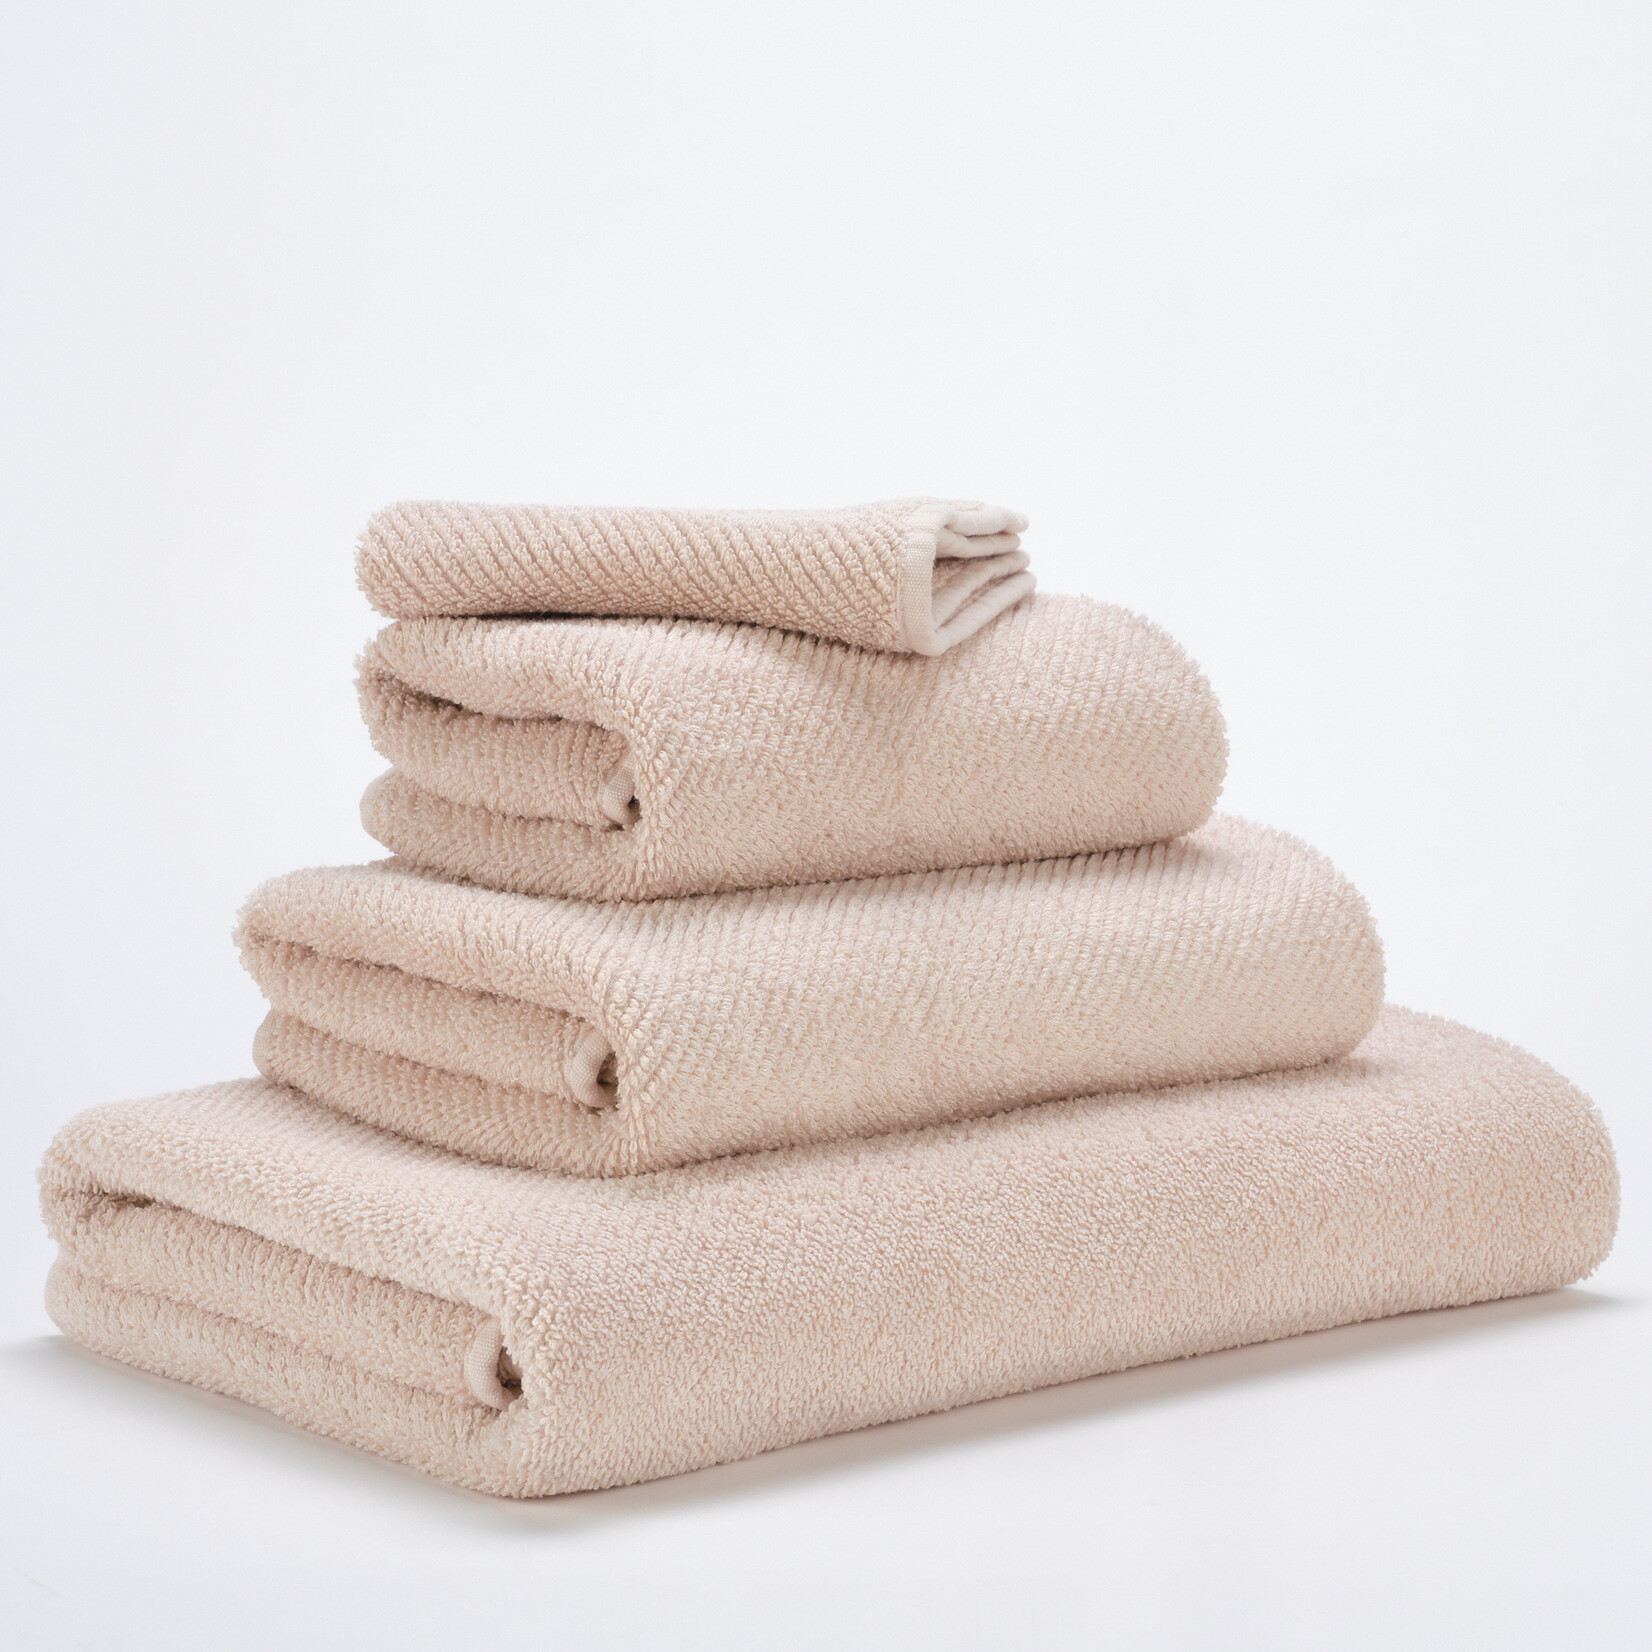 Abyss Abyss Twill Towels Nude 610